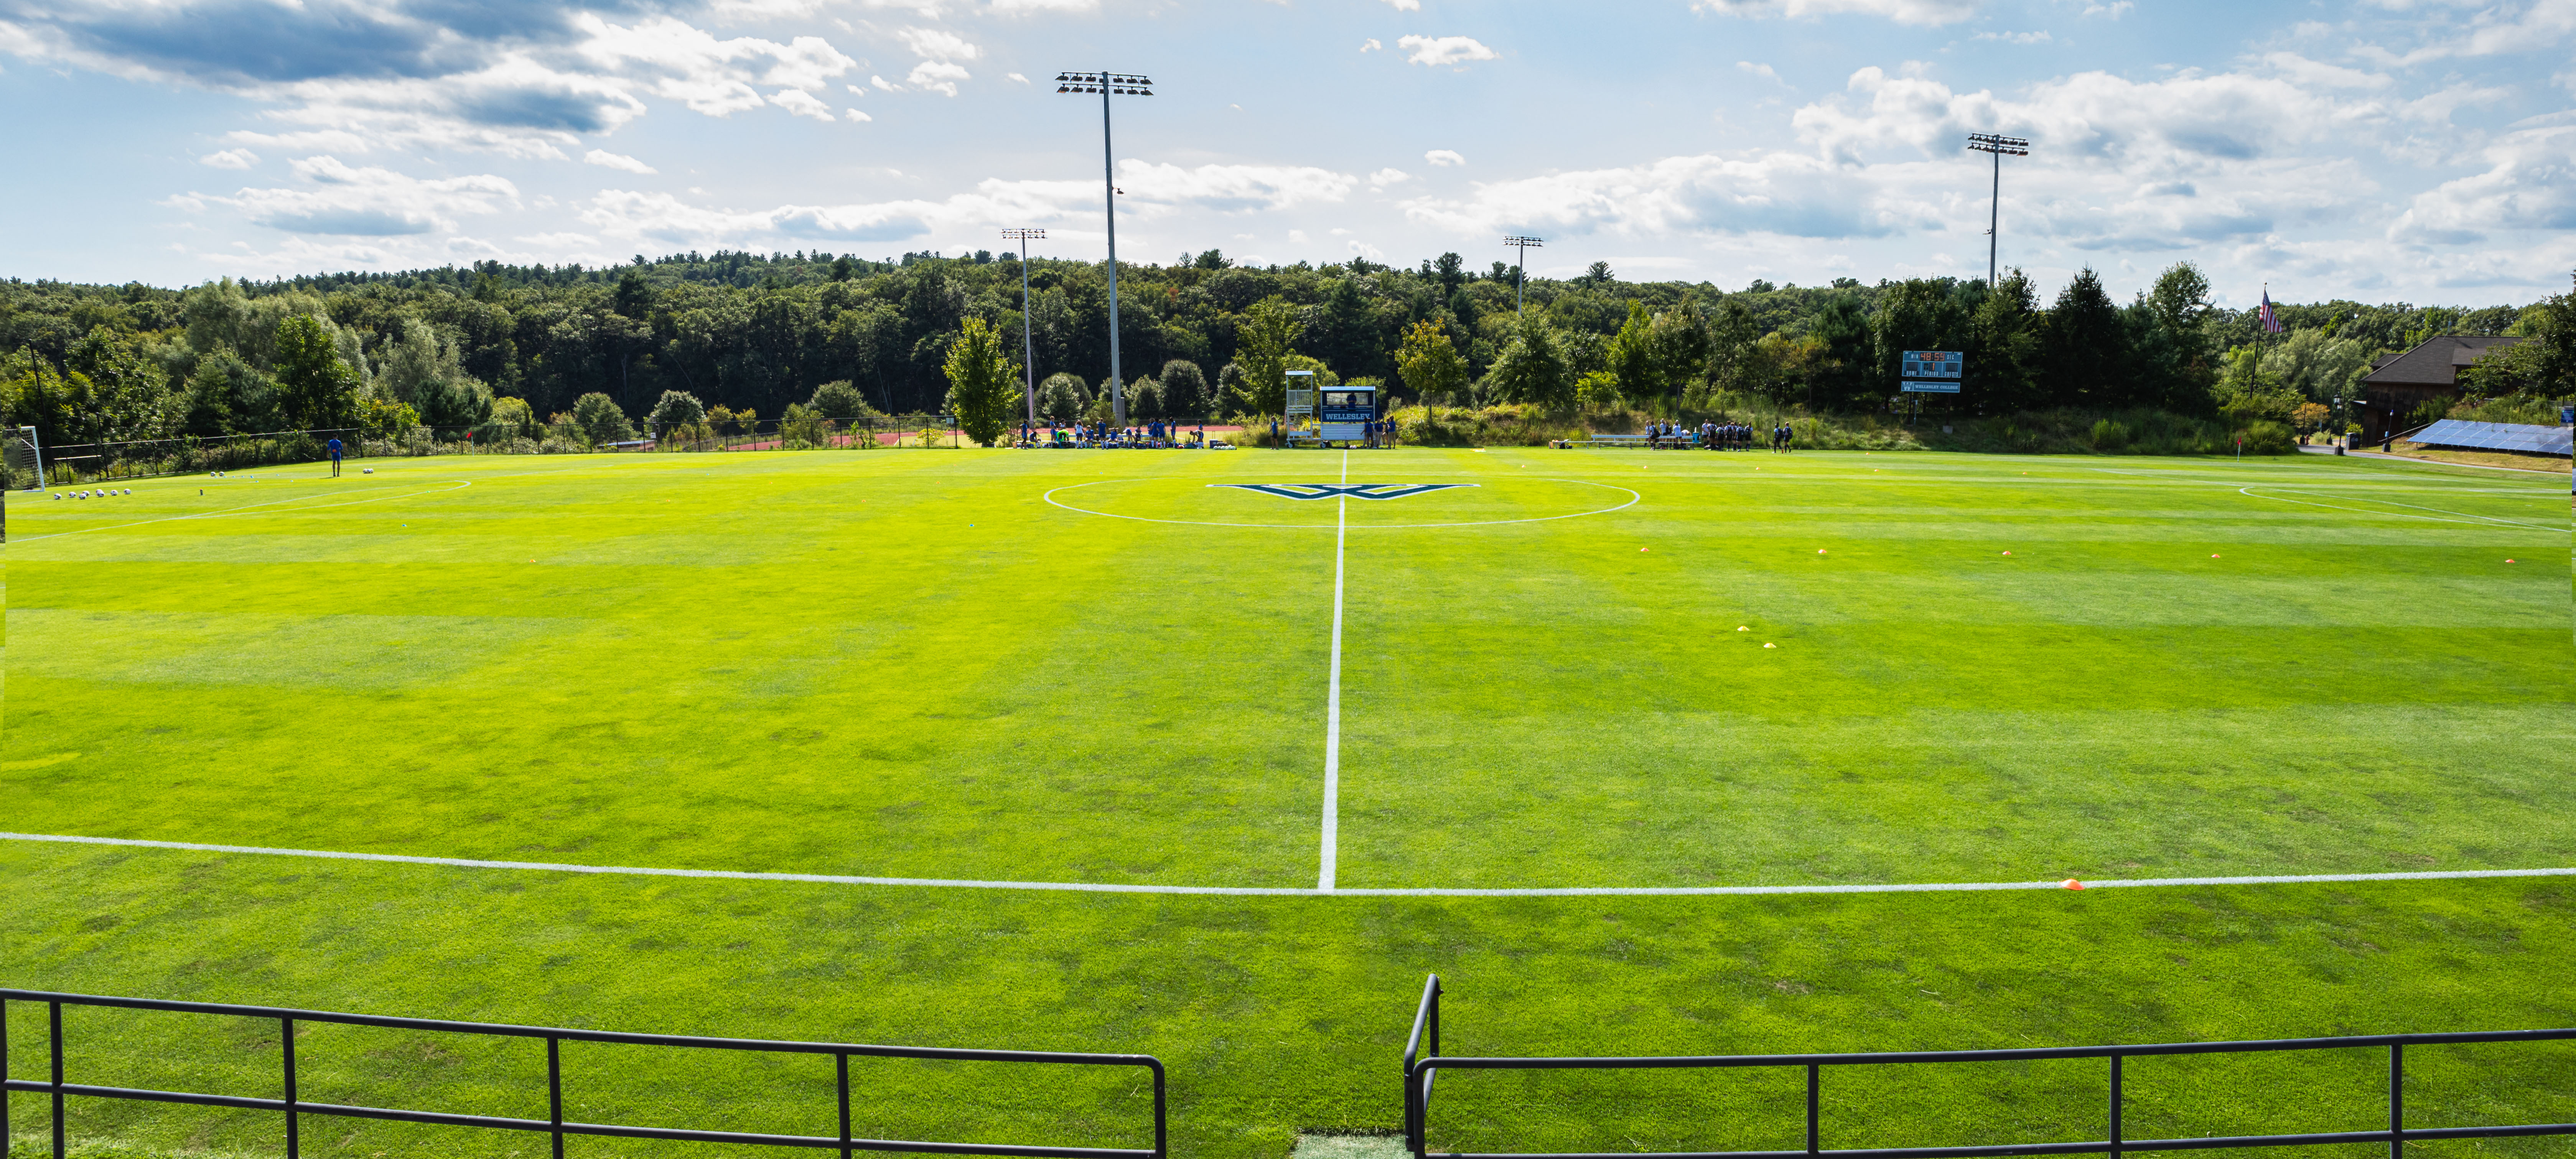 A wide shot of the soccer field with a blue Wellesley W painted in the middle 